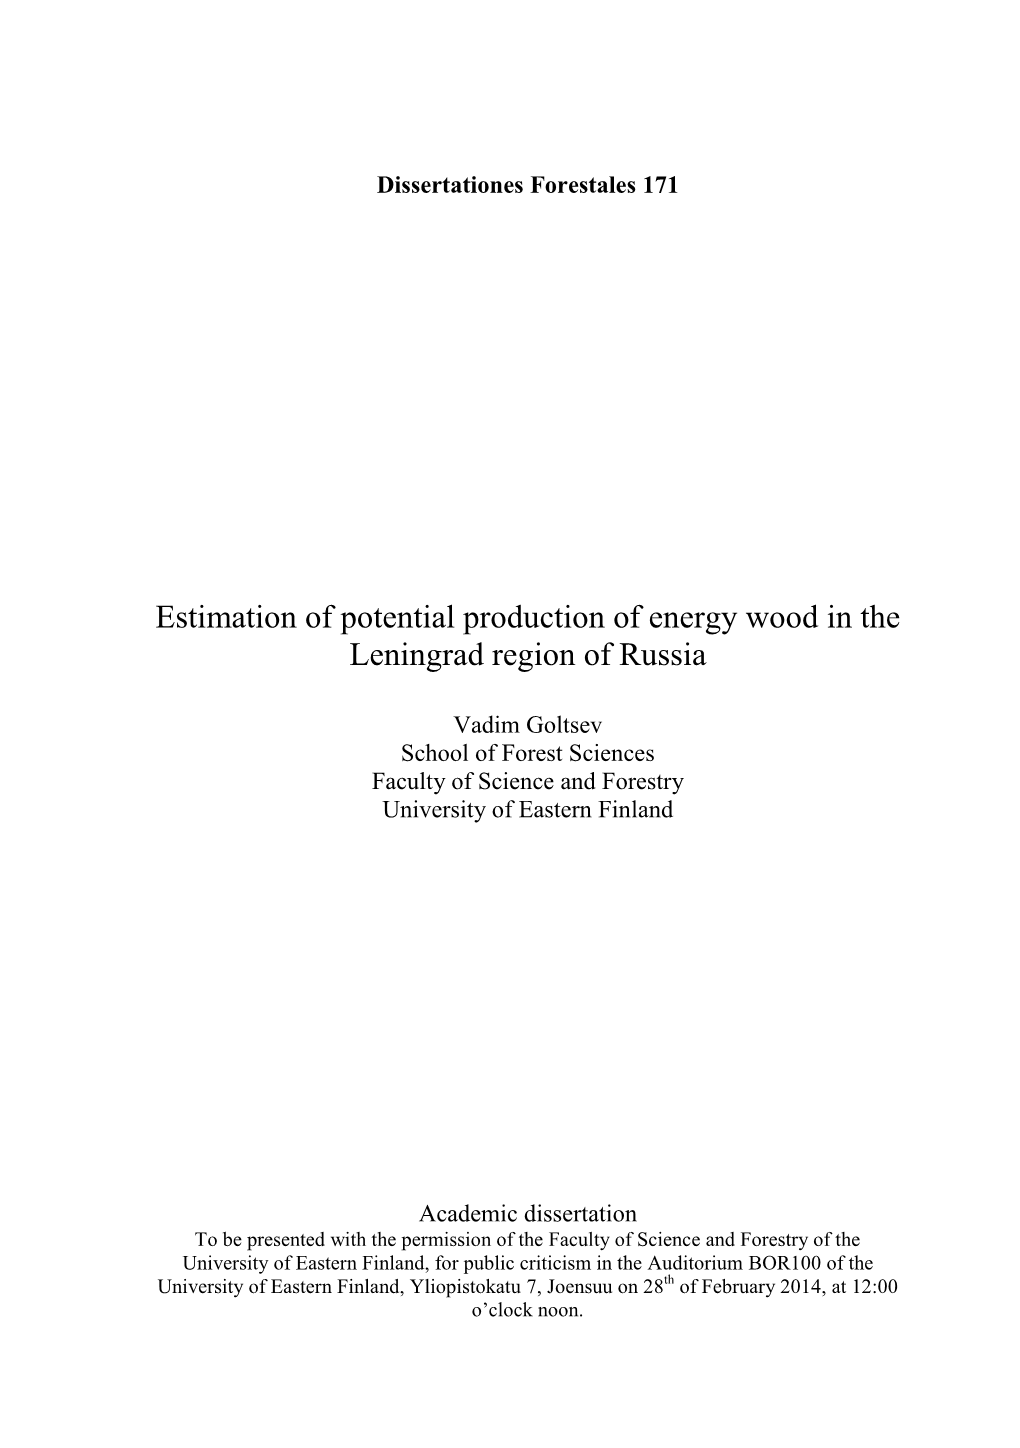 Estimation of Potential Production of Energy Wood in the Leningrad Region of Russia